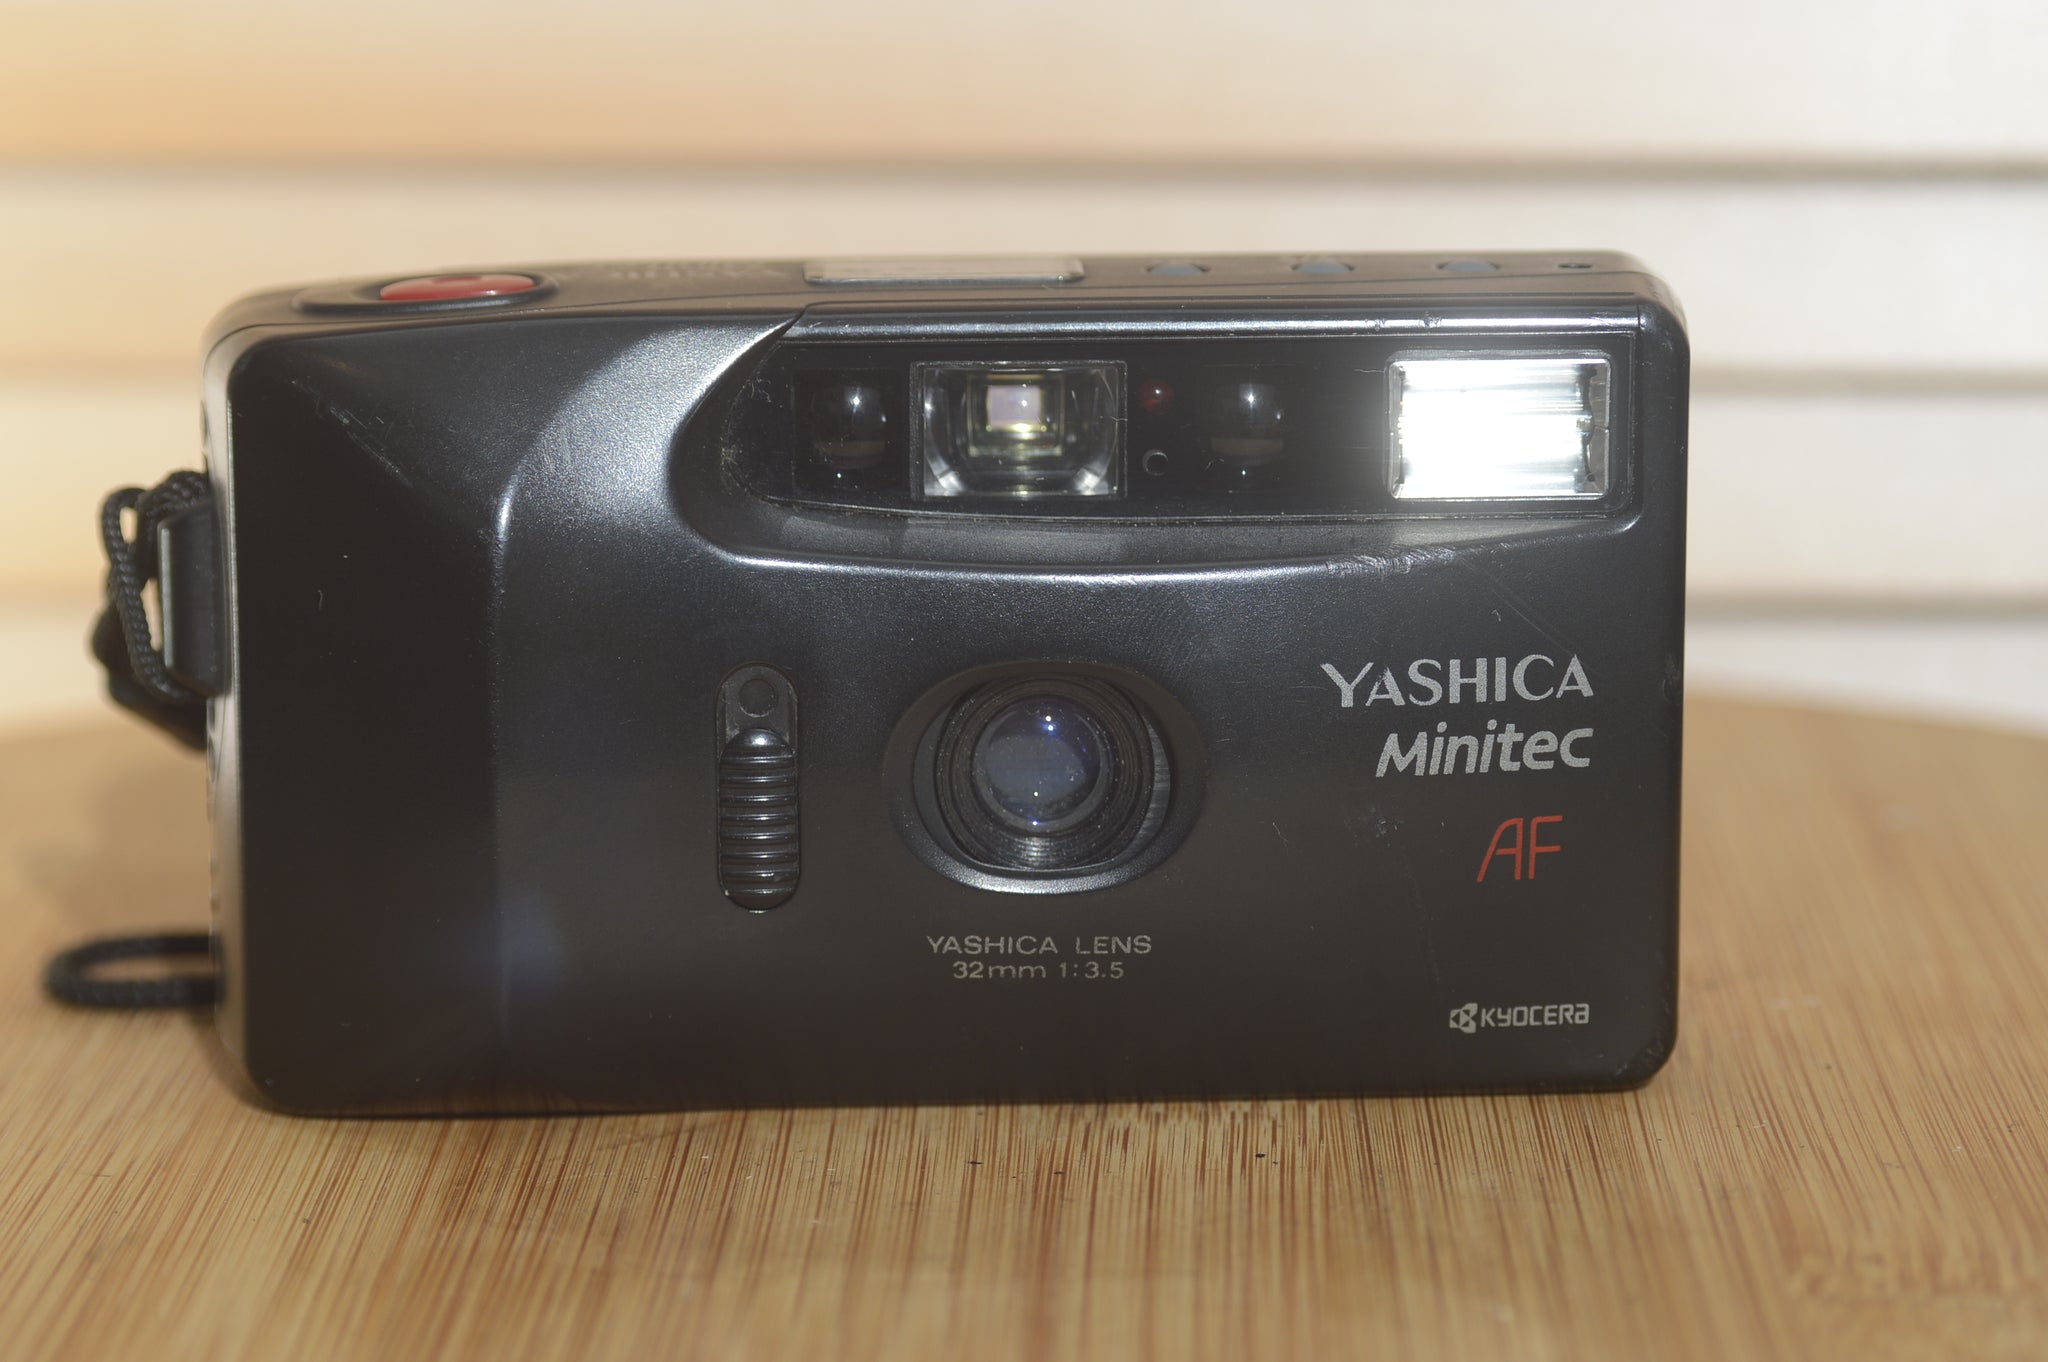 Yashica Minitec 35mm Compact Camera. Fantastic Vintage Point and Shoot. - RewindCameras quality vintage cameras, fully tested and serviced